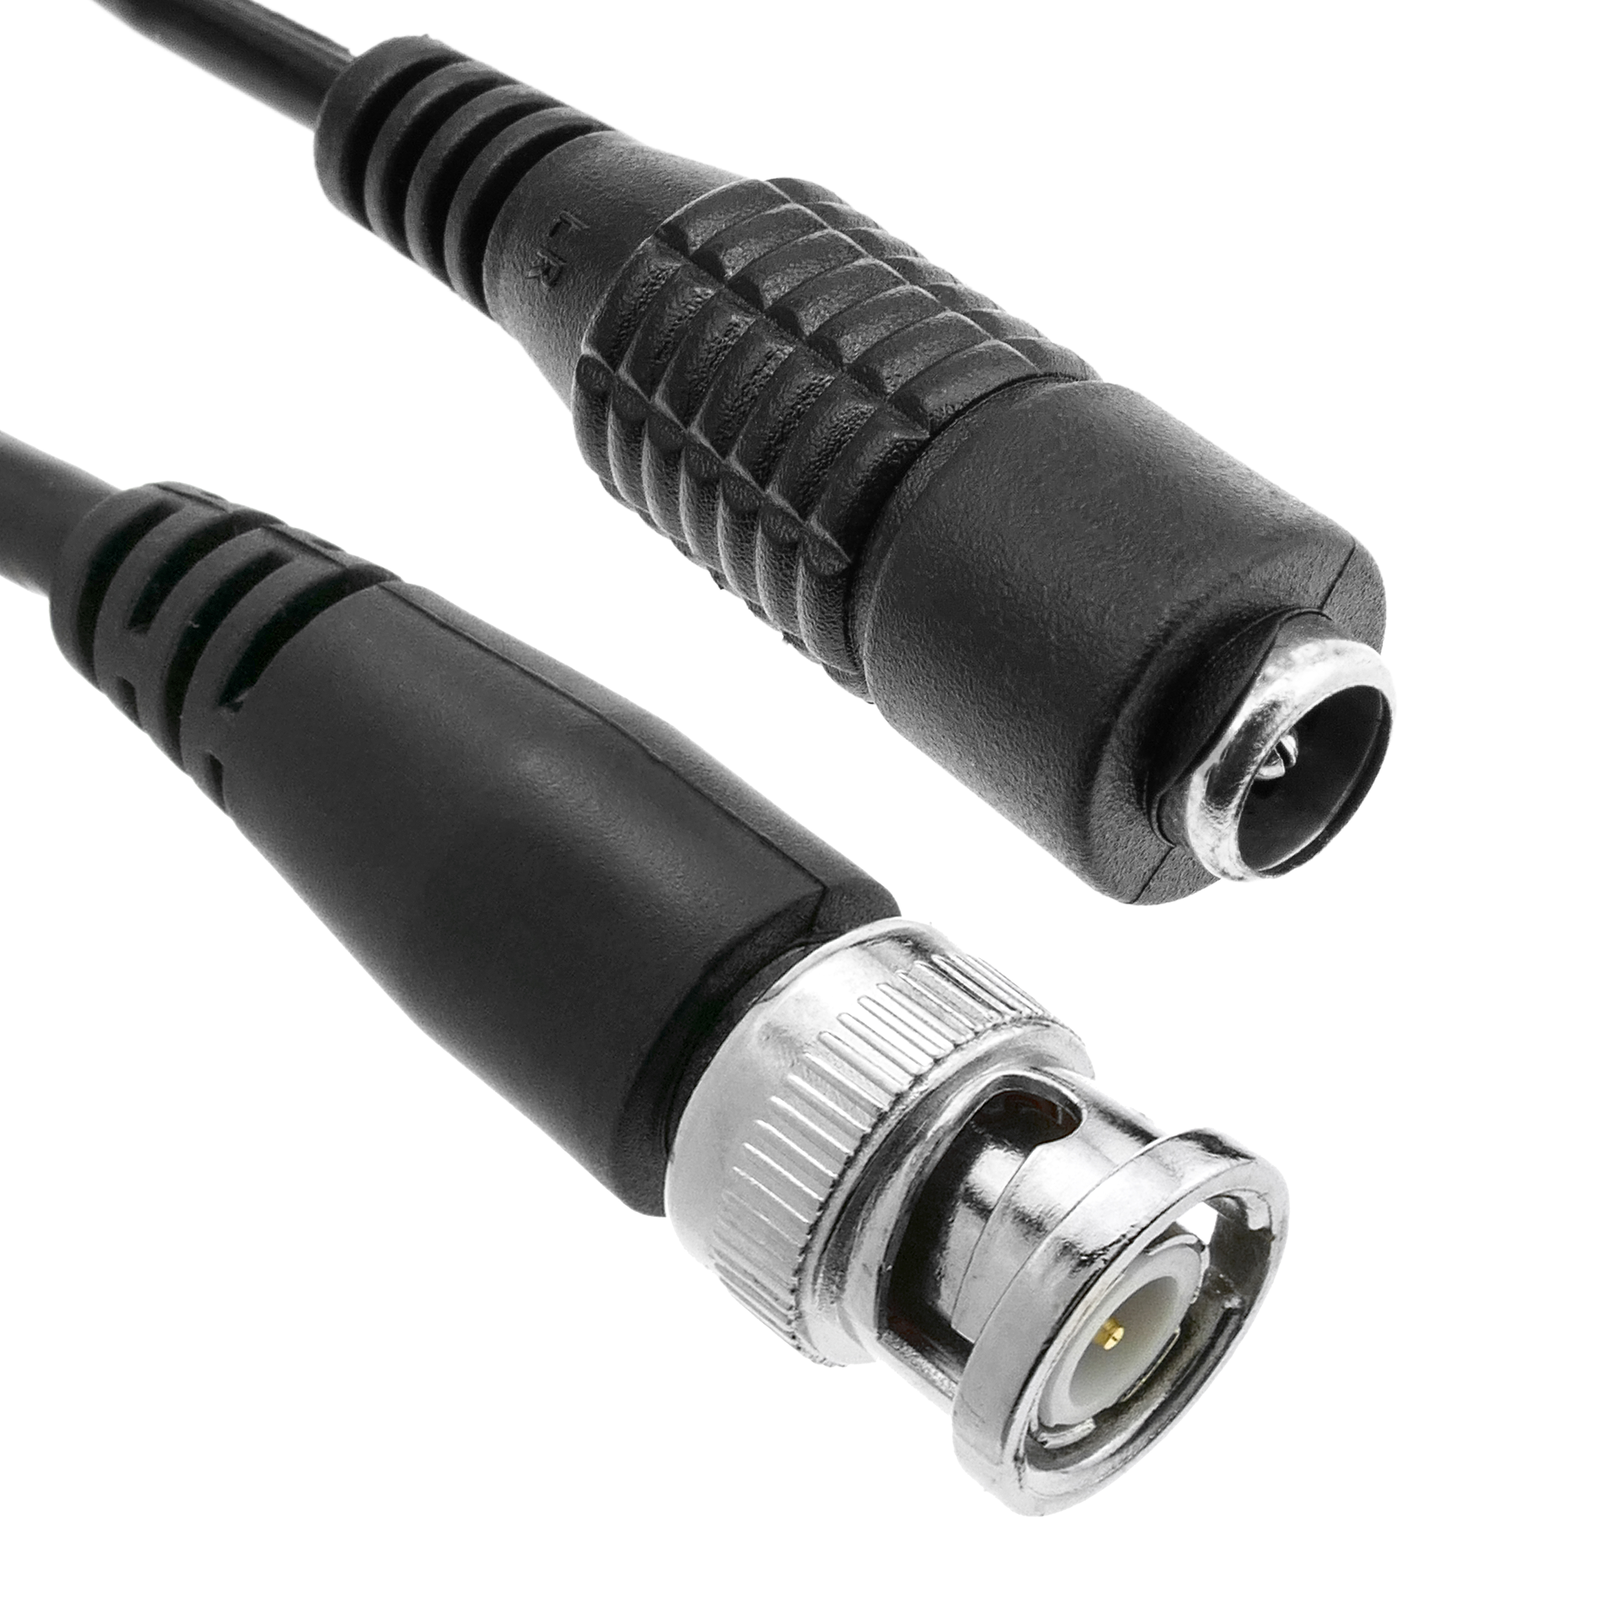 Composite video cable and power supply for CCTV camera 5m - Cablematic